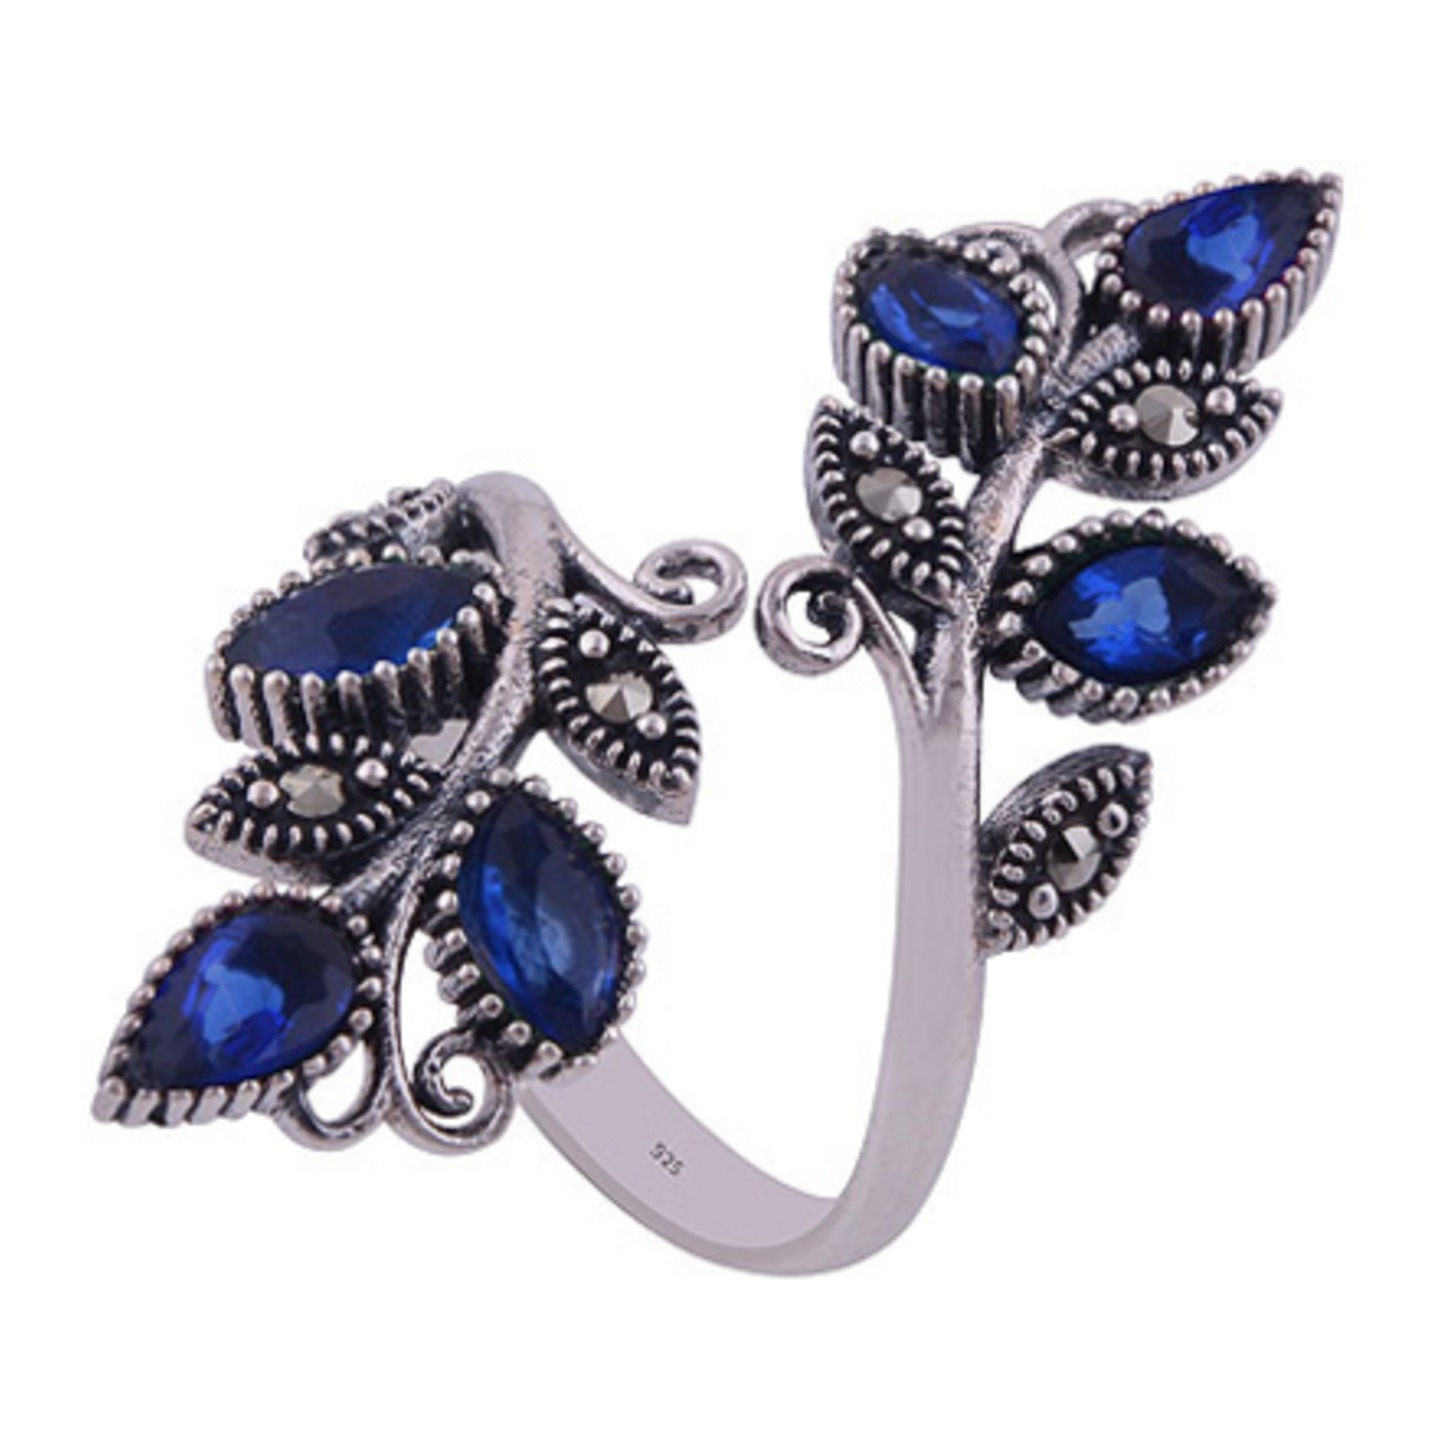 The Blue Vine Silver Ring